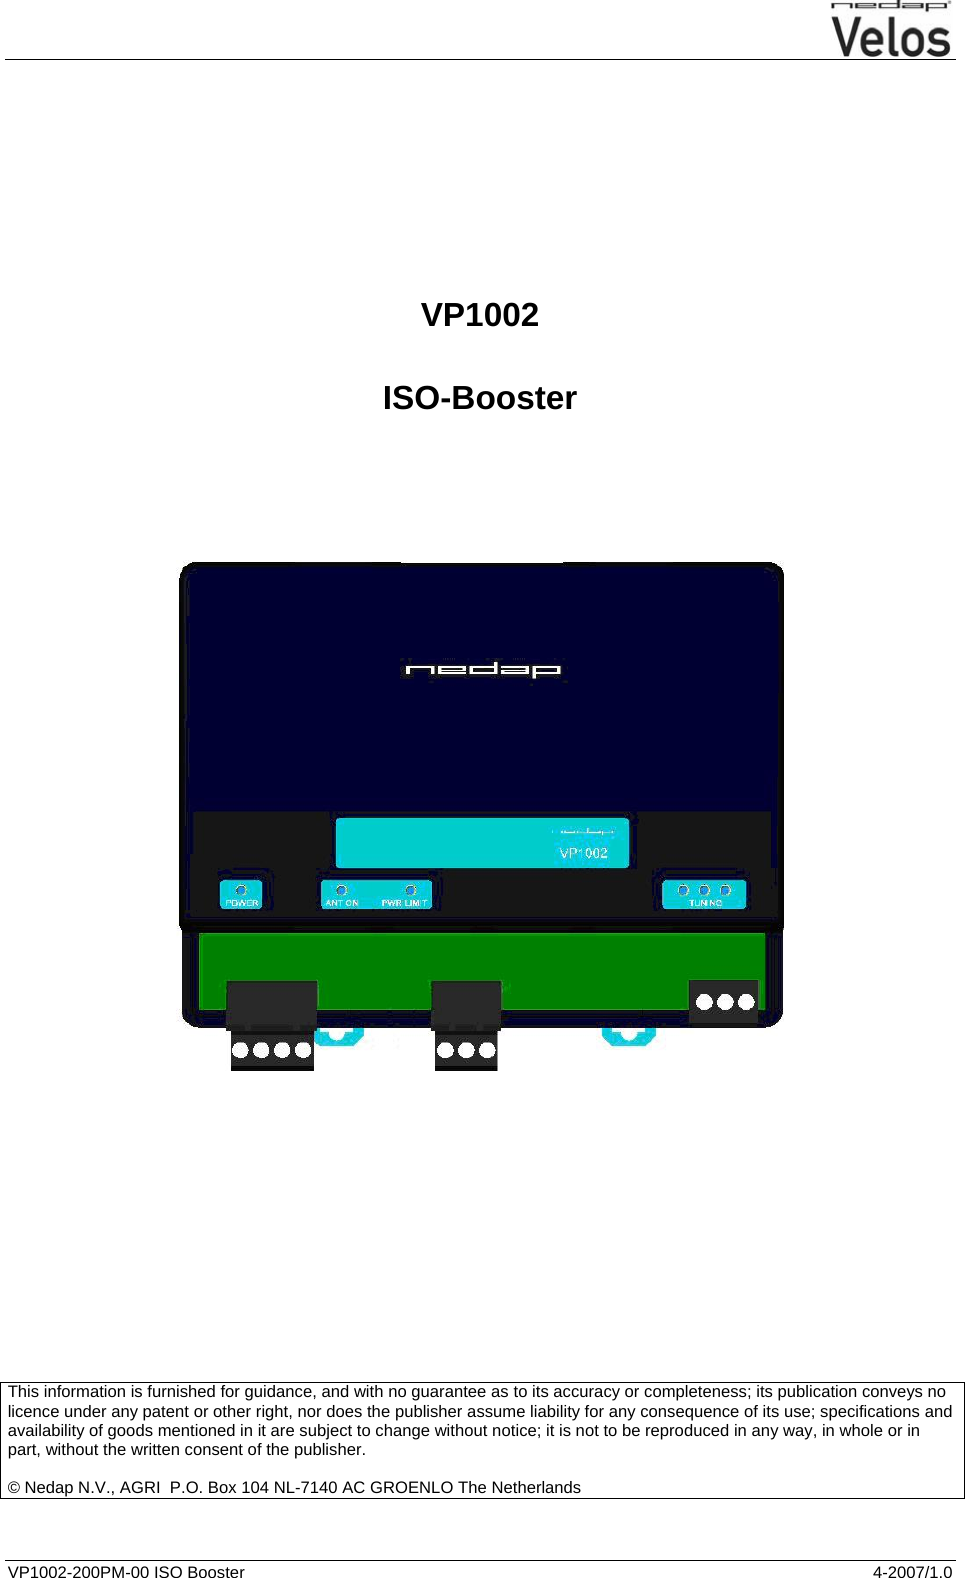  VP1002-200PM-00 ISO Booster  4-2007/1.0          VP1002  ISO-Booster                     This information is furnished for guidance, and with no guarantee as to its accuracy or completeness; its publication conveys no licence under any patent or other right, nor does the publisher assume liability for any consequence of its use; specifications and availability of goods mentioned in it are subject to change without notice; it is not to be reproduced in any way, in whole or in part, without the written consent of the publisher.  © Nedap N.V., AGRI  P.O. Box 104 NL-7140 AC GROENLO The Netherlands     